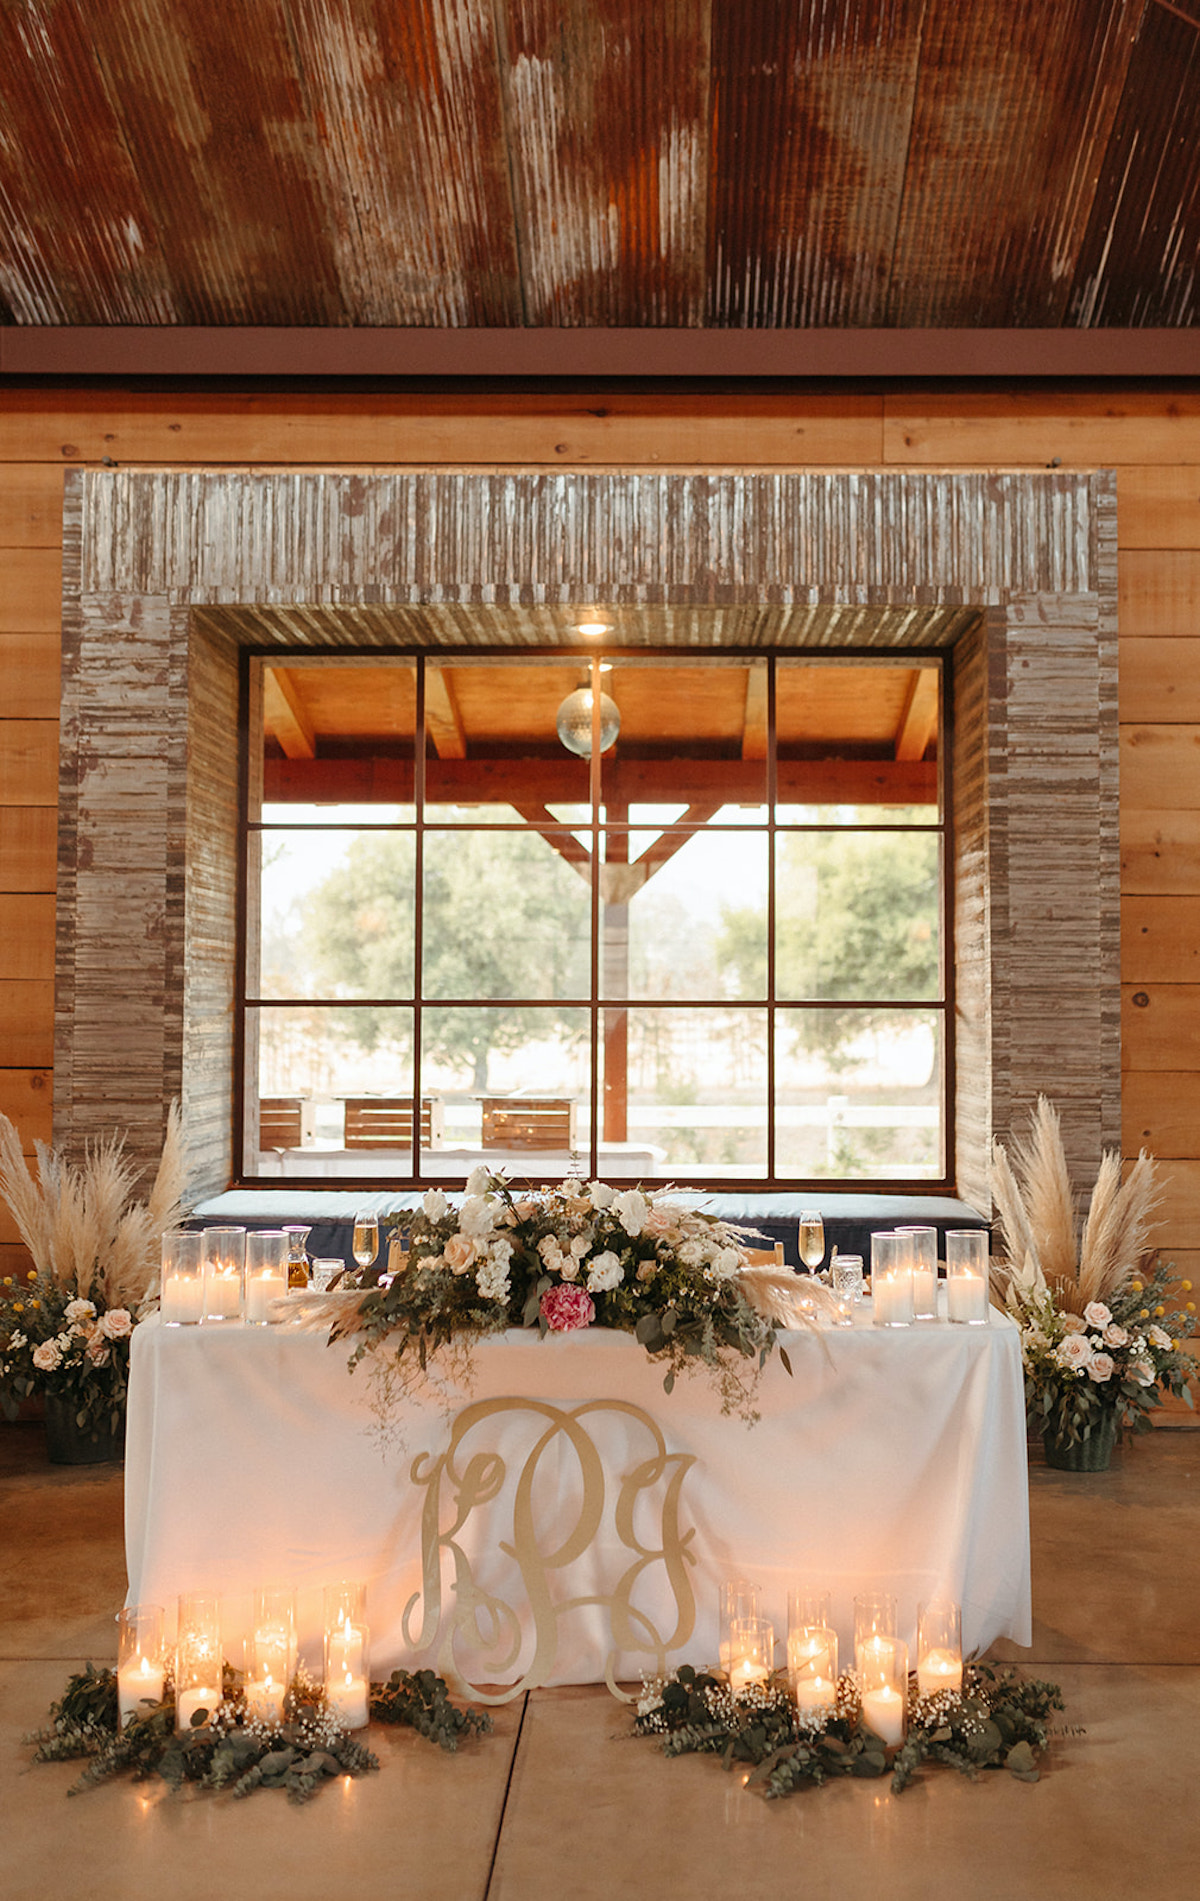 Incorporating candles into your barn reception